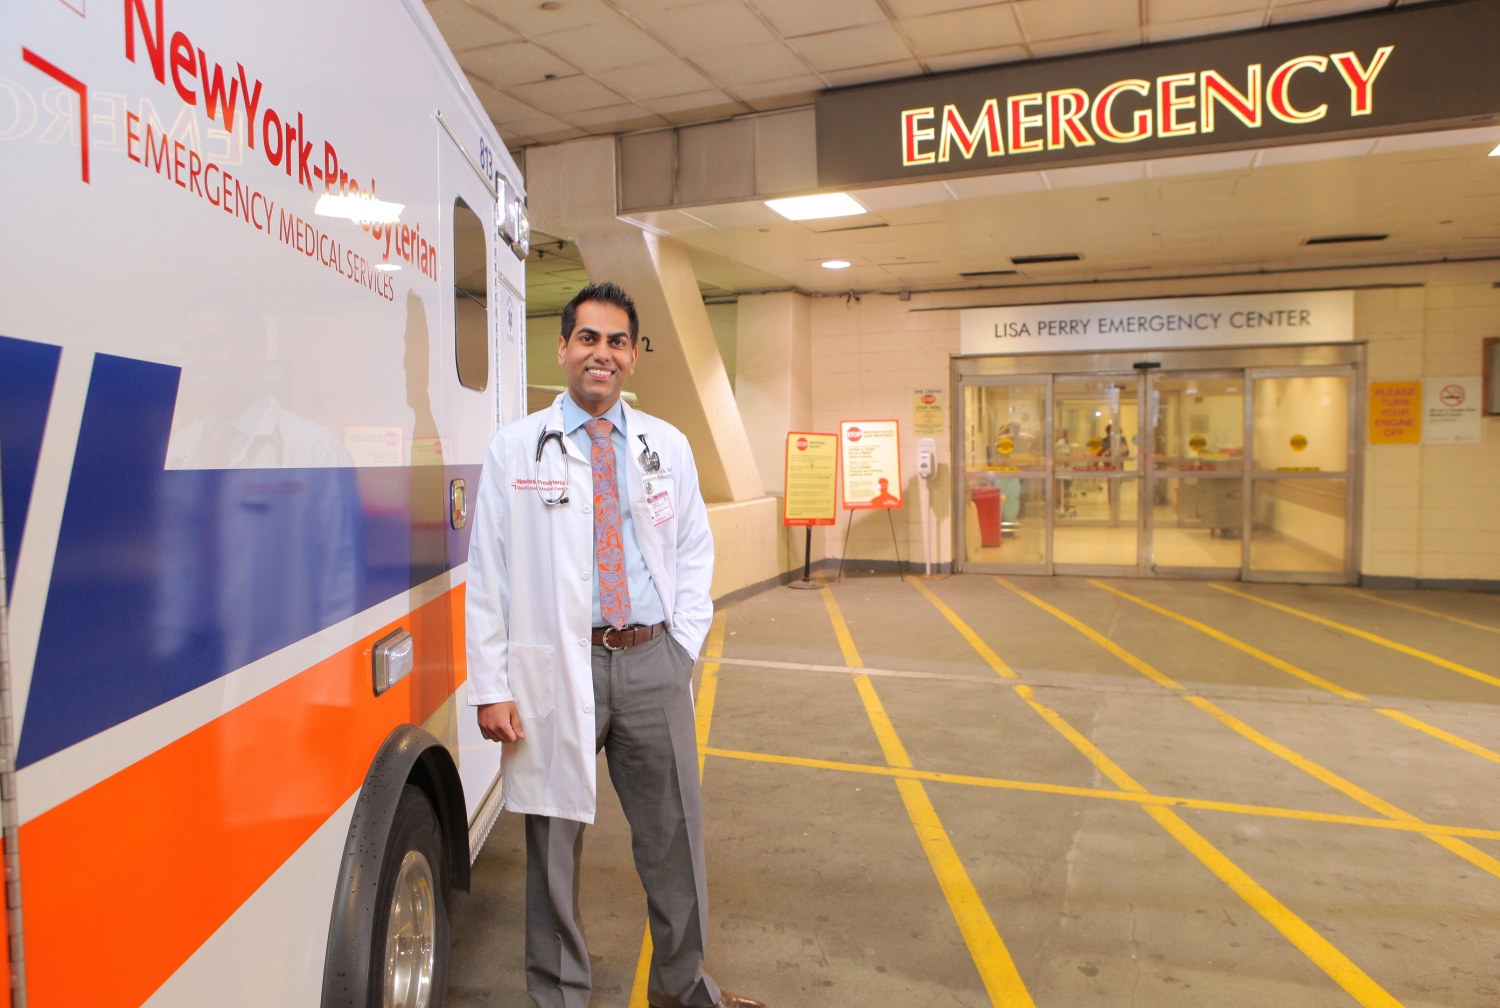 Future of Emergency Medicine Beyond the Emergency Department